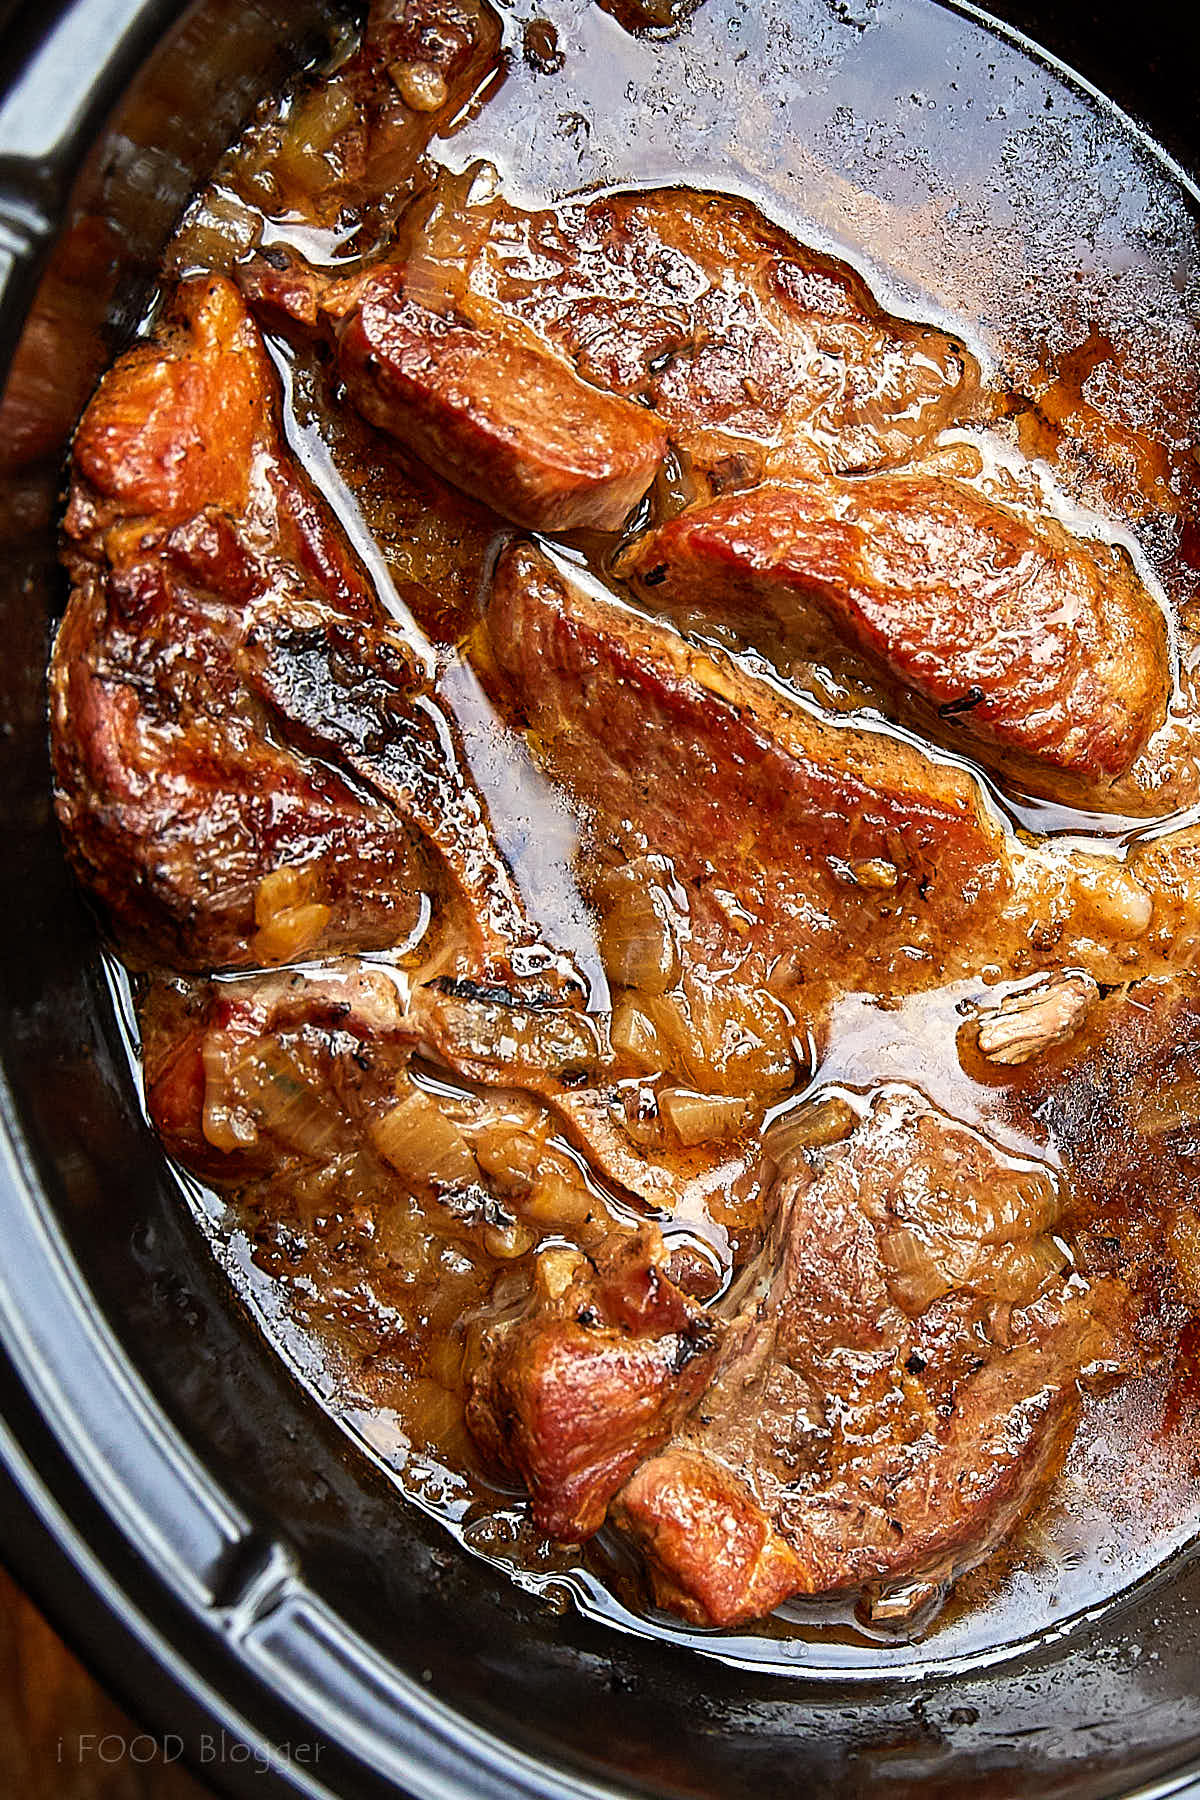 Country style pork ribs inside a slow cooker with amber color juices at the bottom, top down view.